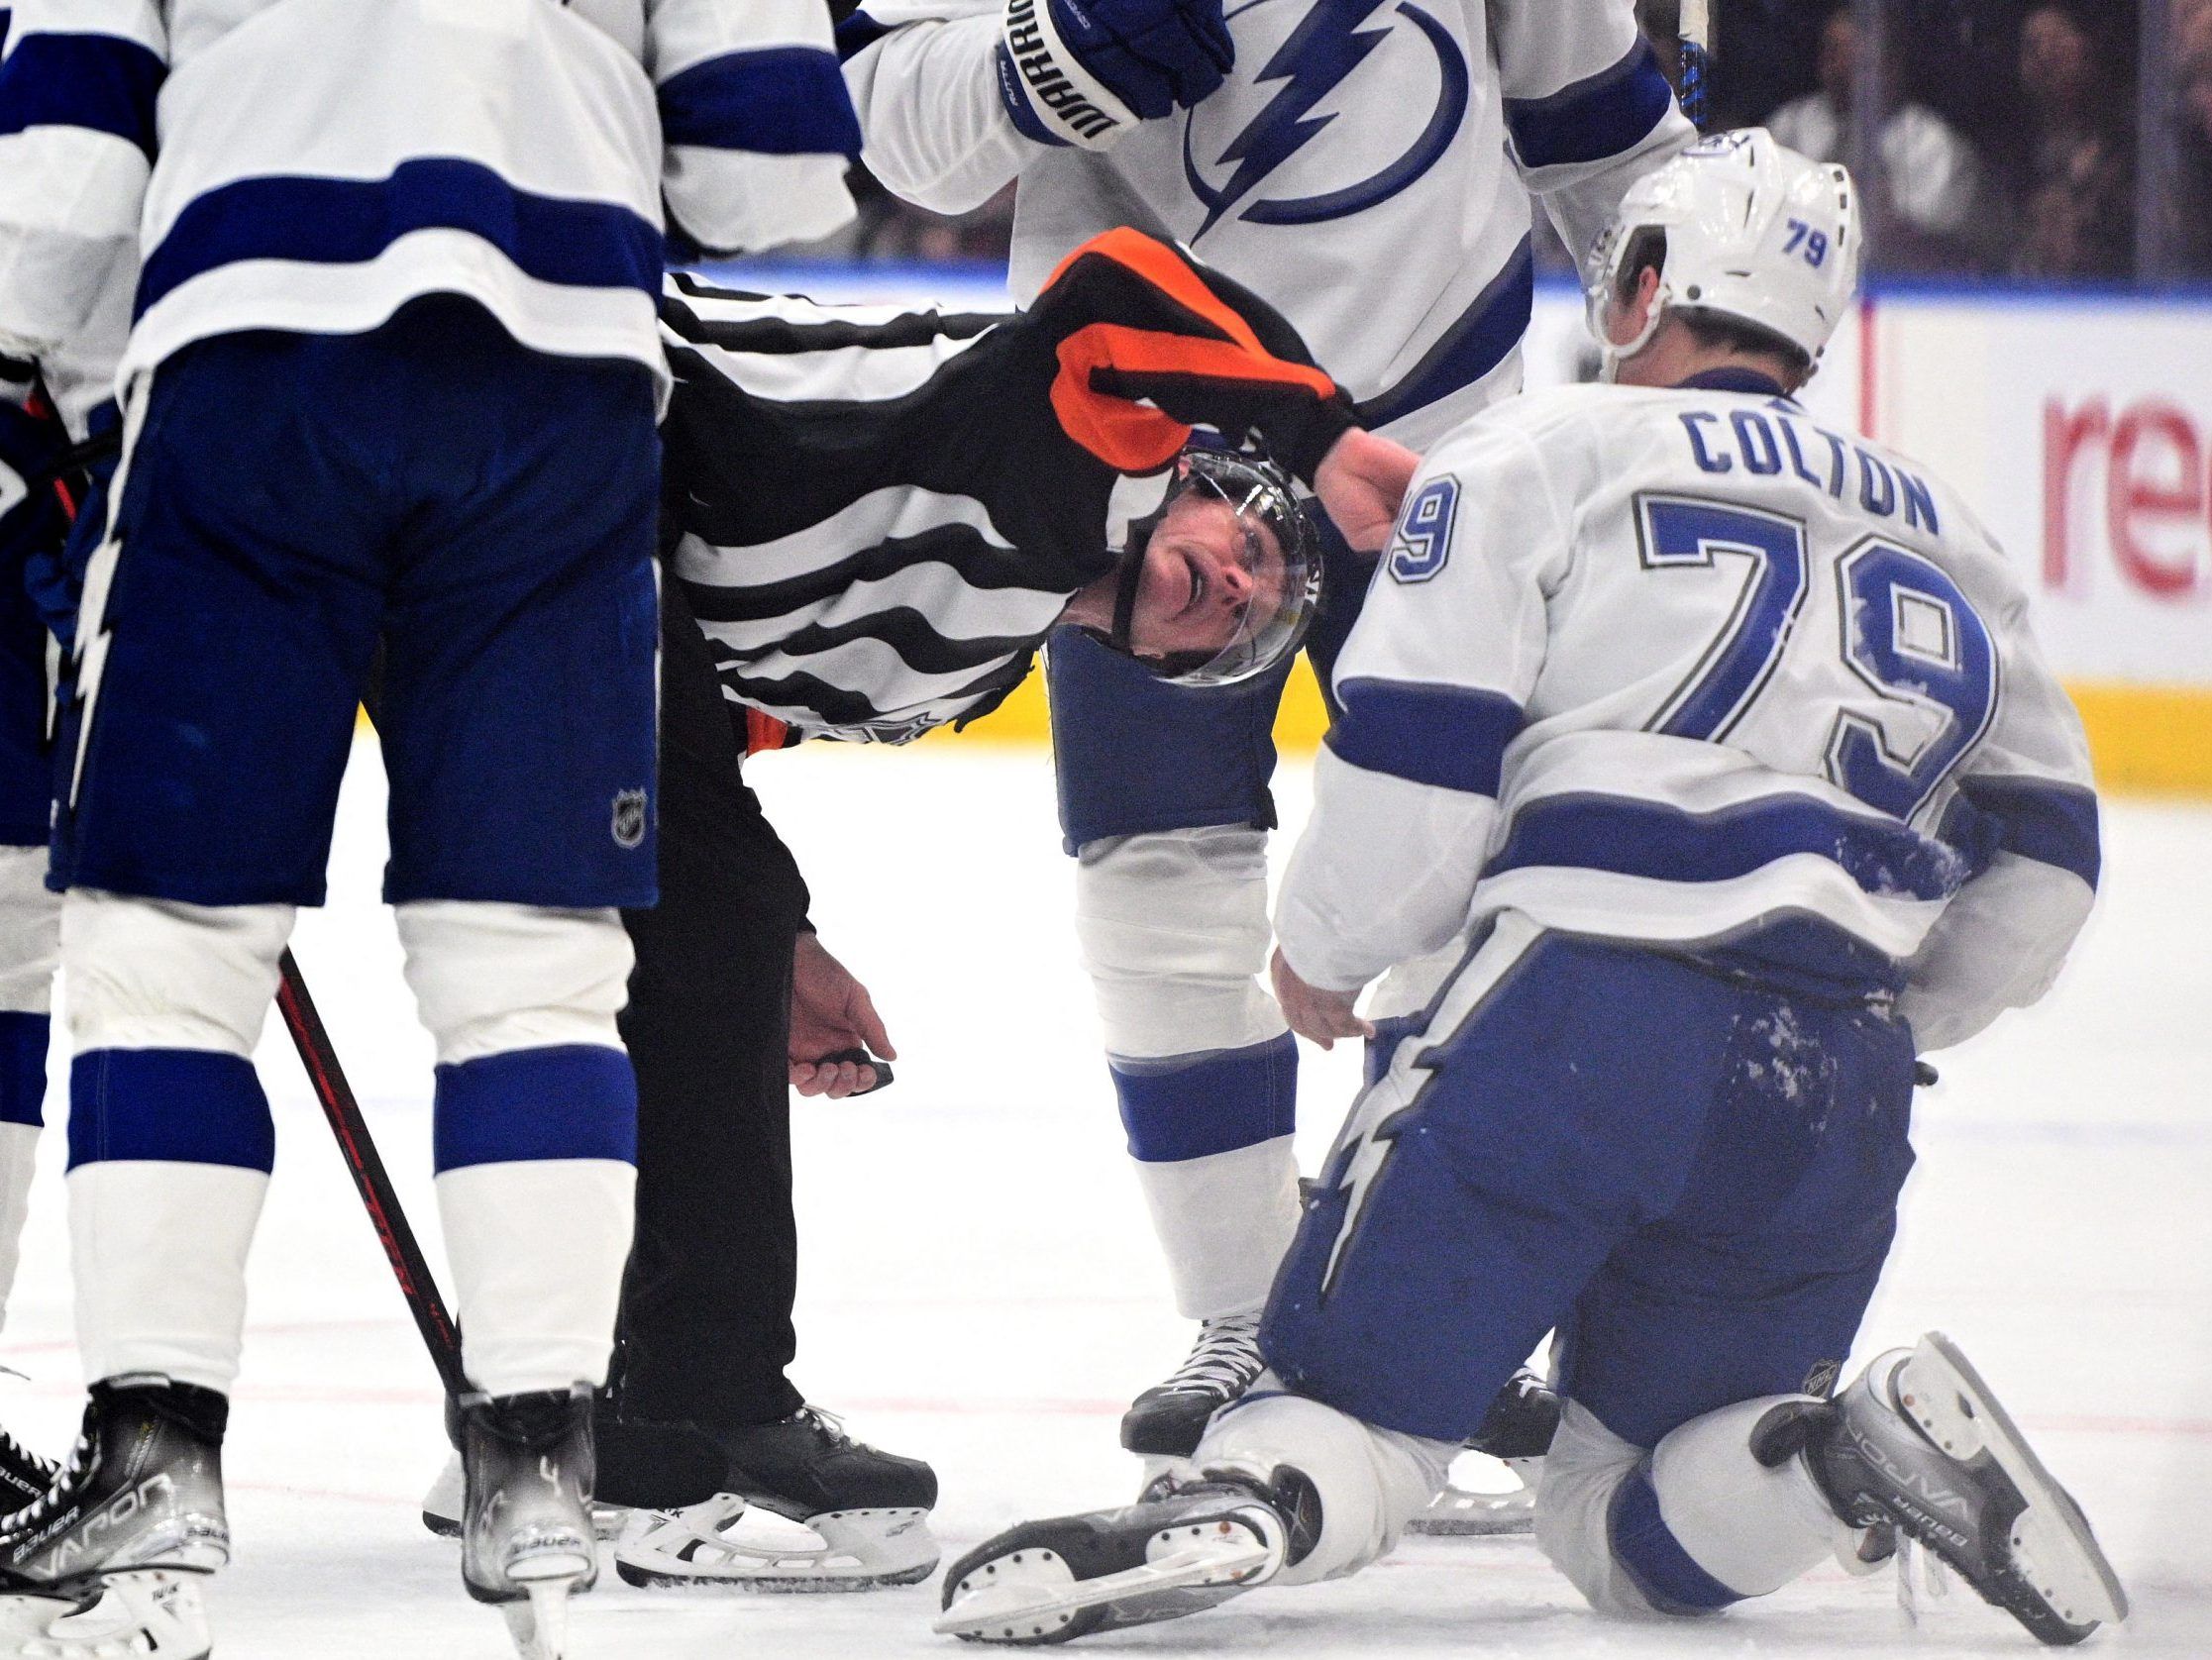 Tampa Bay Lightning forward Ross Colton (79) celebrates with the